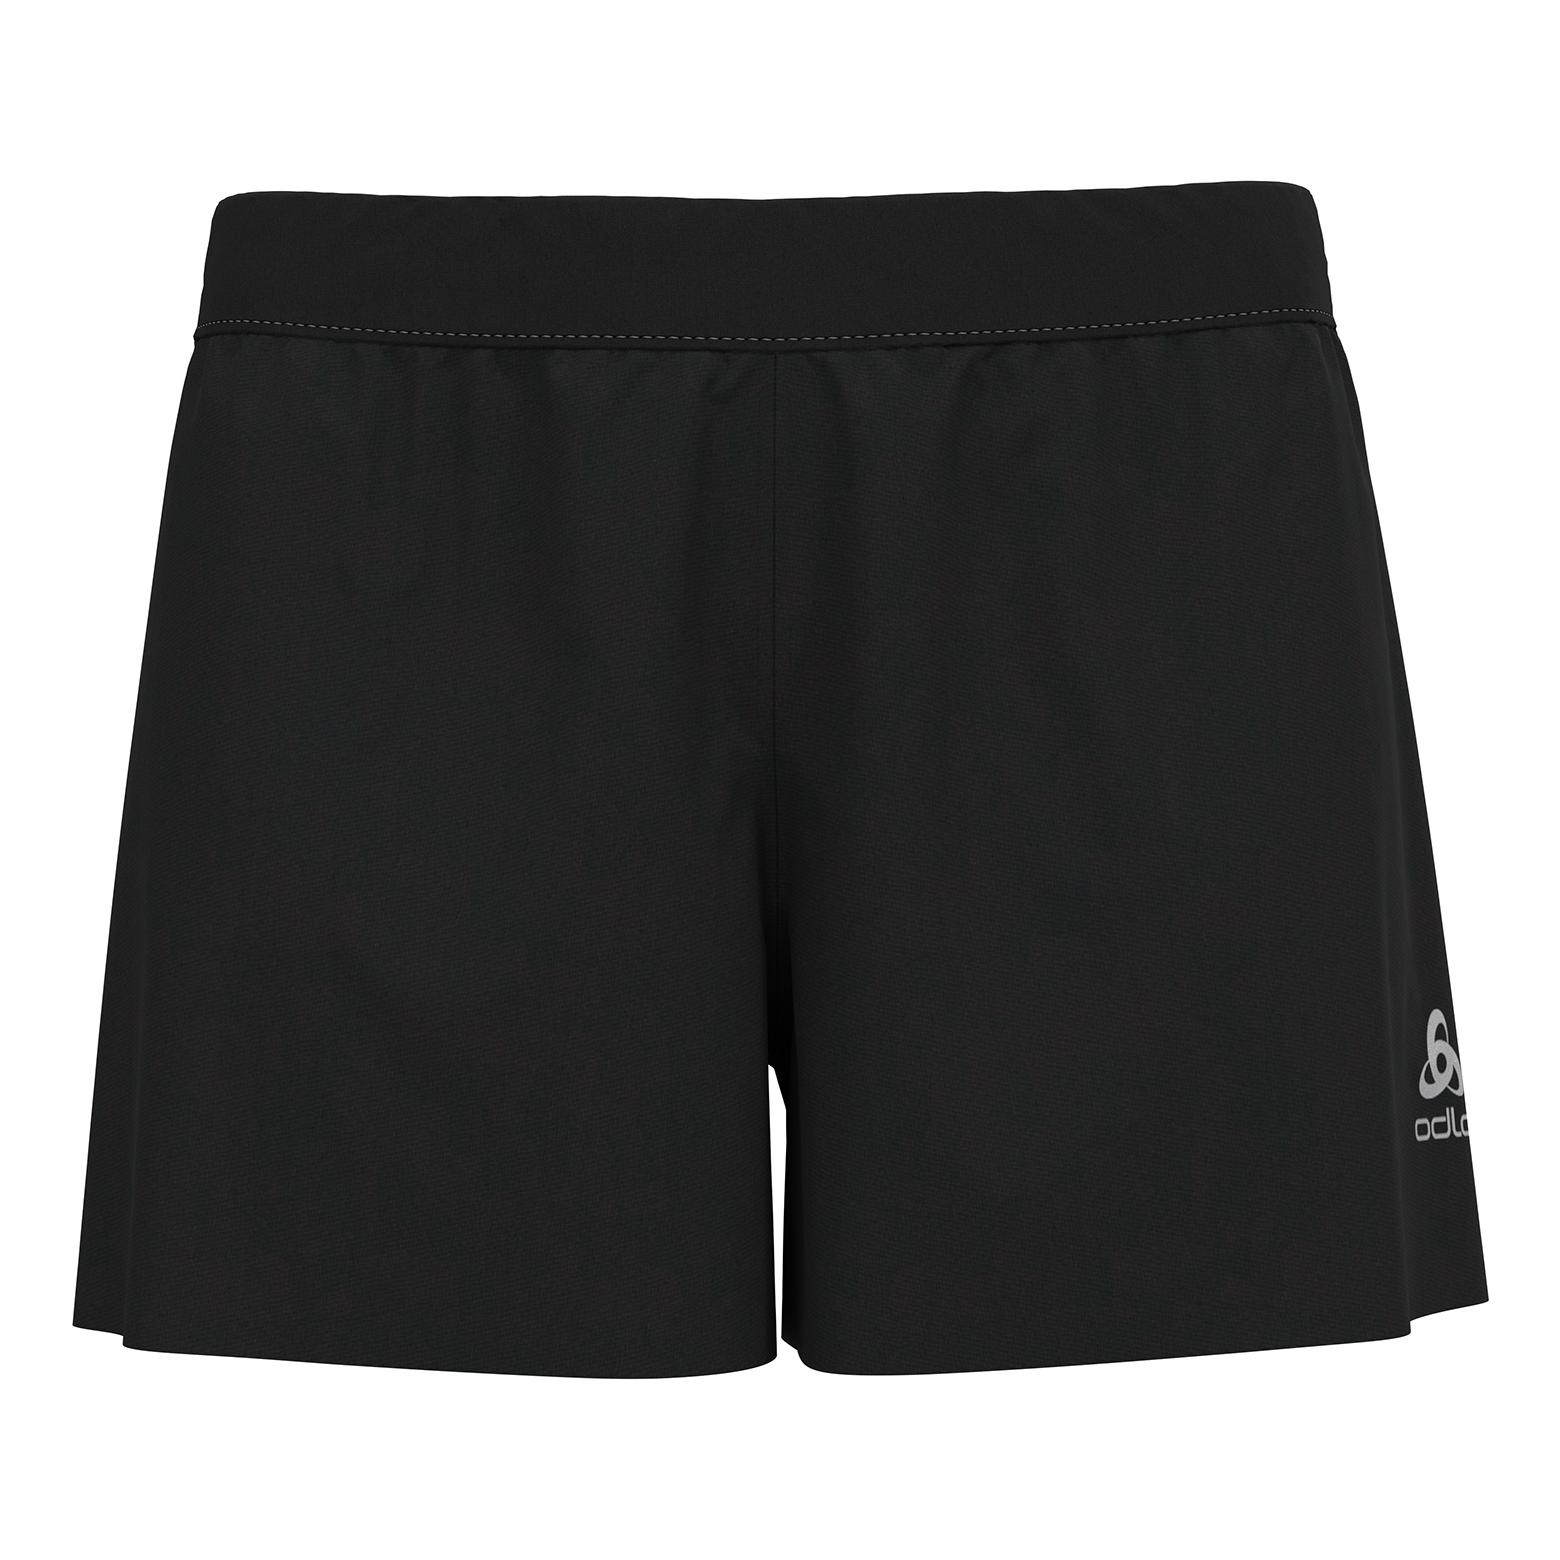 Odlo Zeroweight 3 Inches Shorts Noir XS 